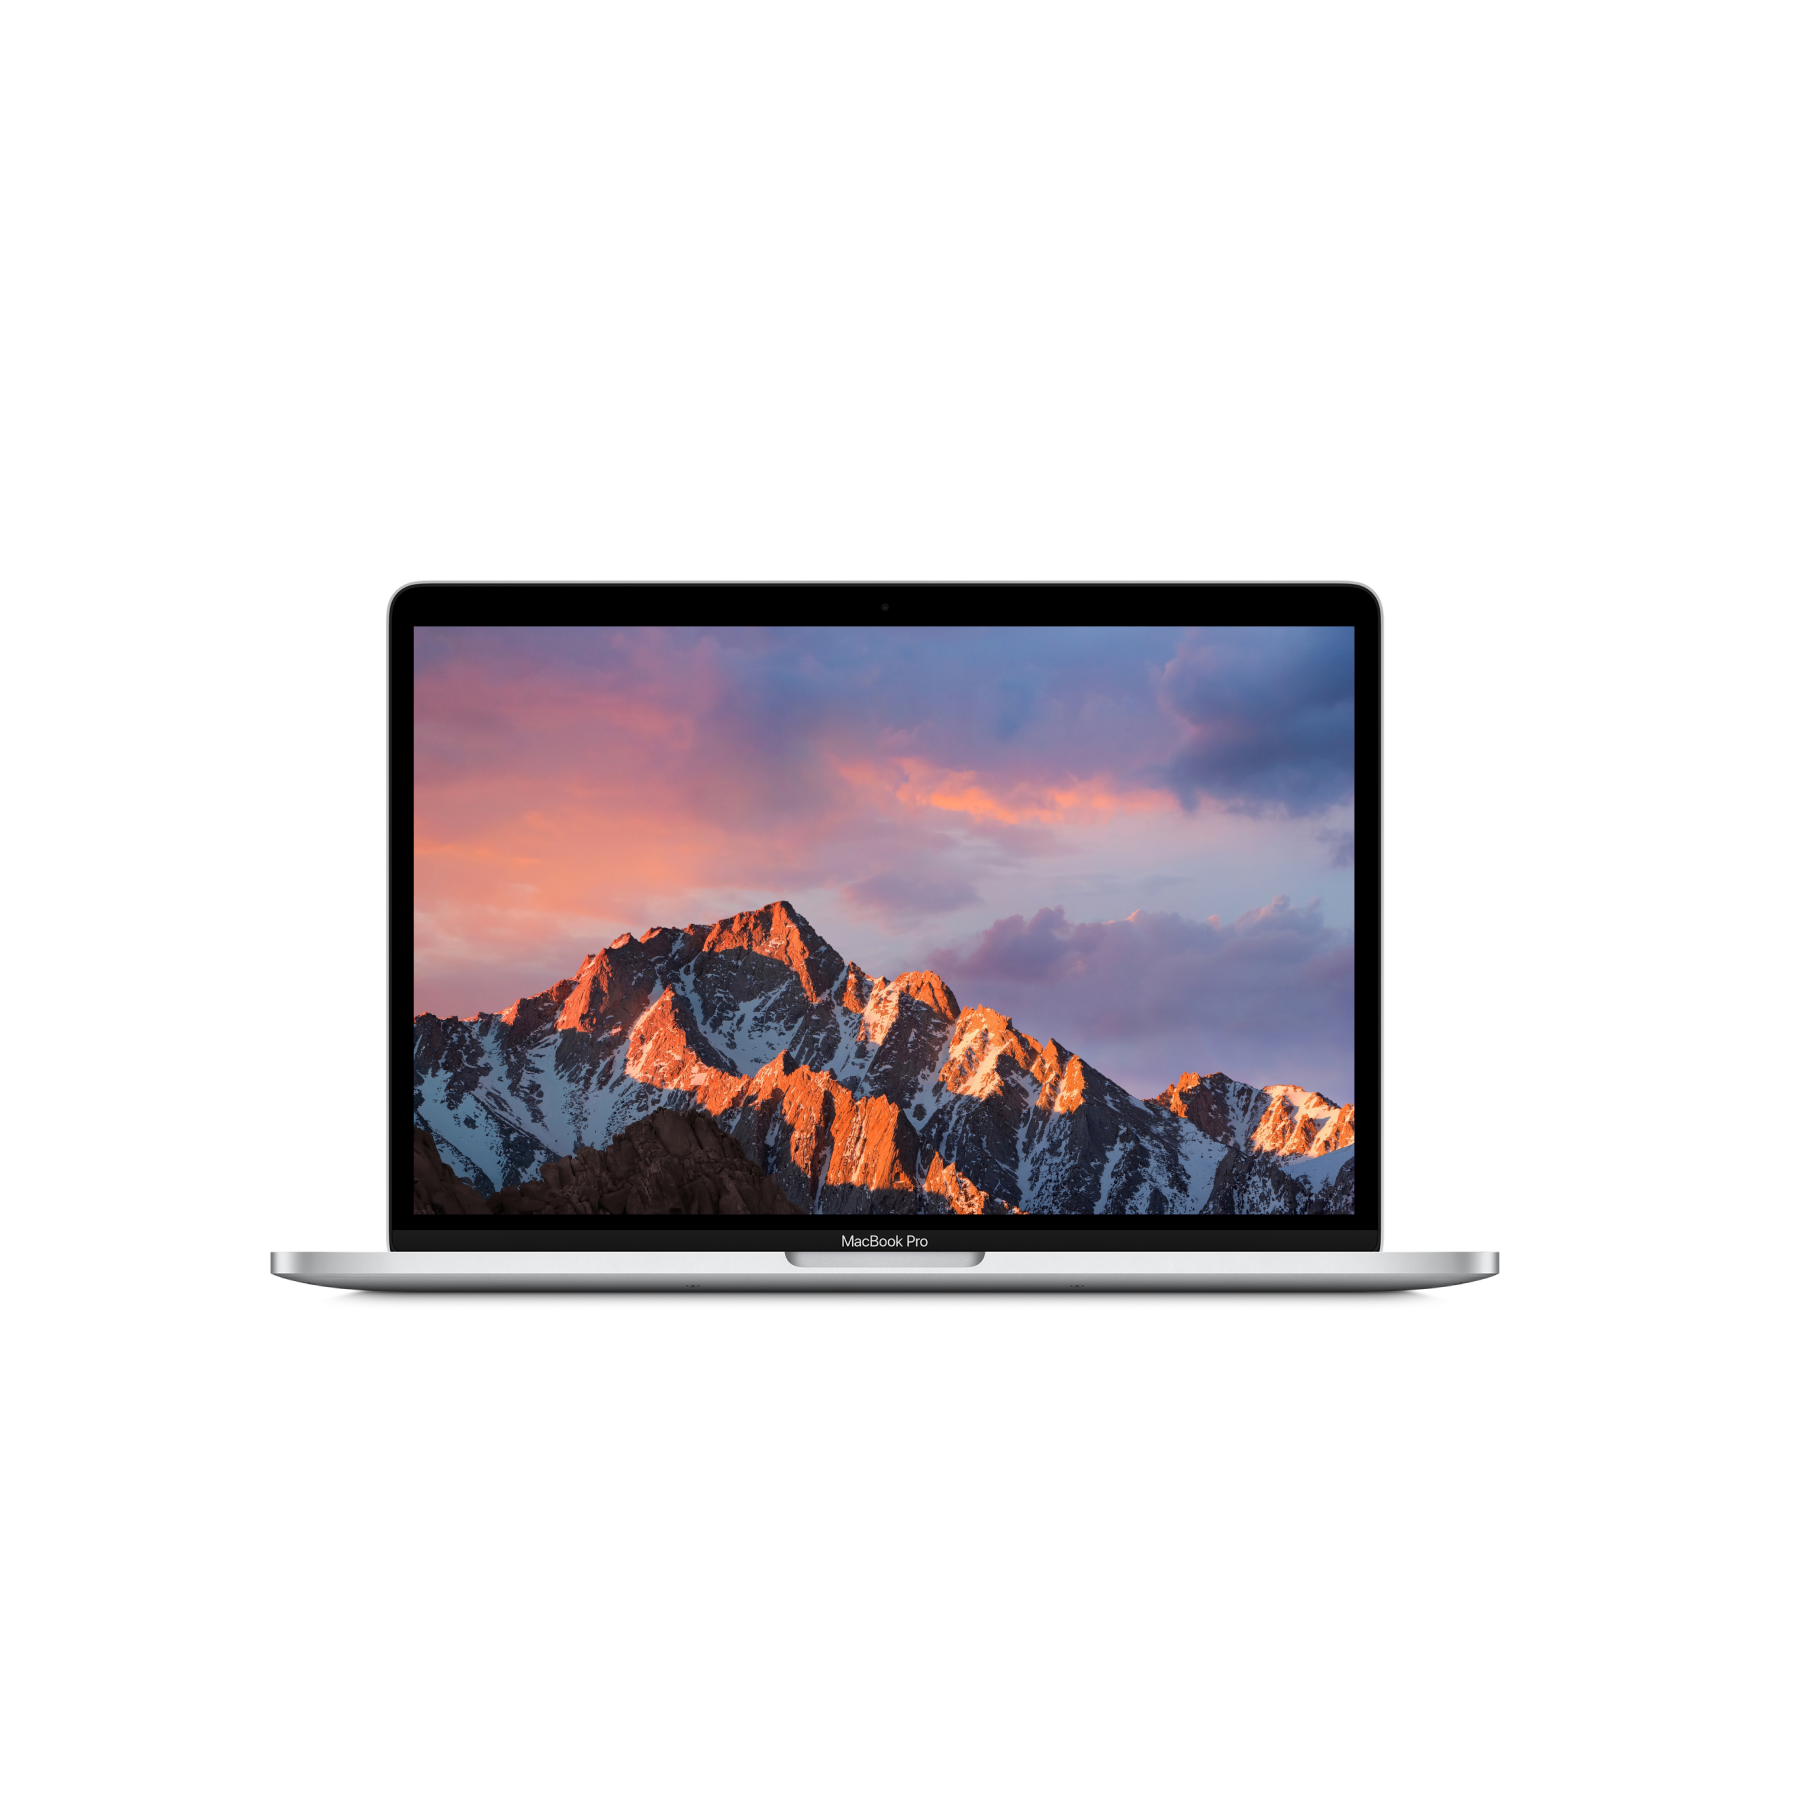 MacBook Pro (13-inch, 2016, Four Thunderbolt 3 ports) 2.9GHz,Intel Core i5 256GB - Silver (Best) - iStore Pre-owned